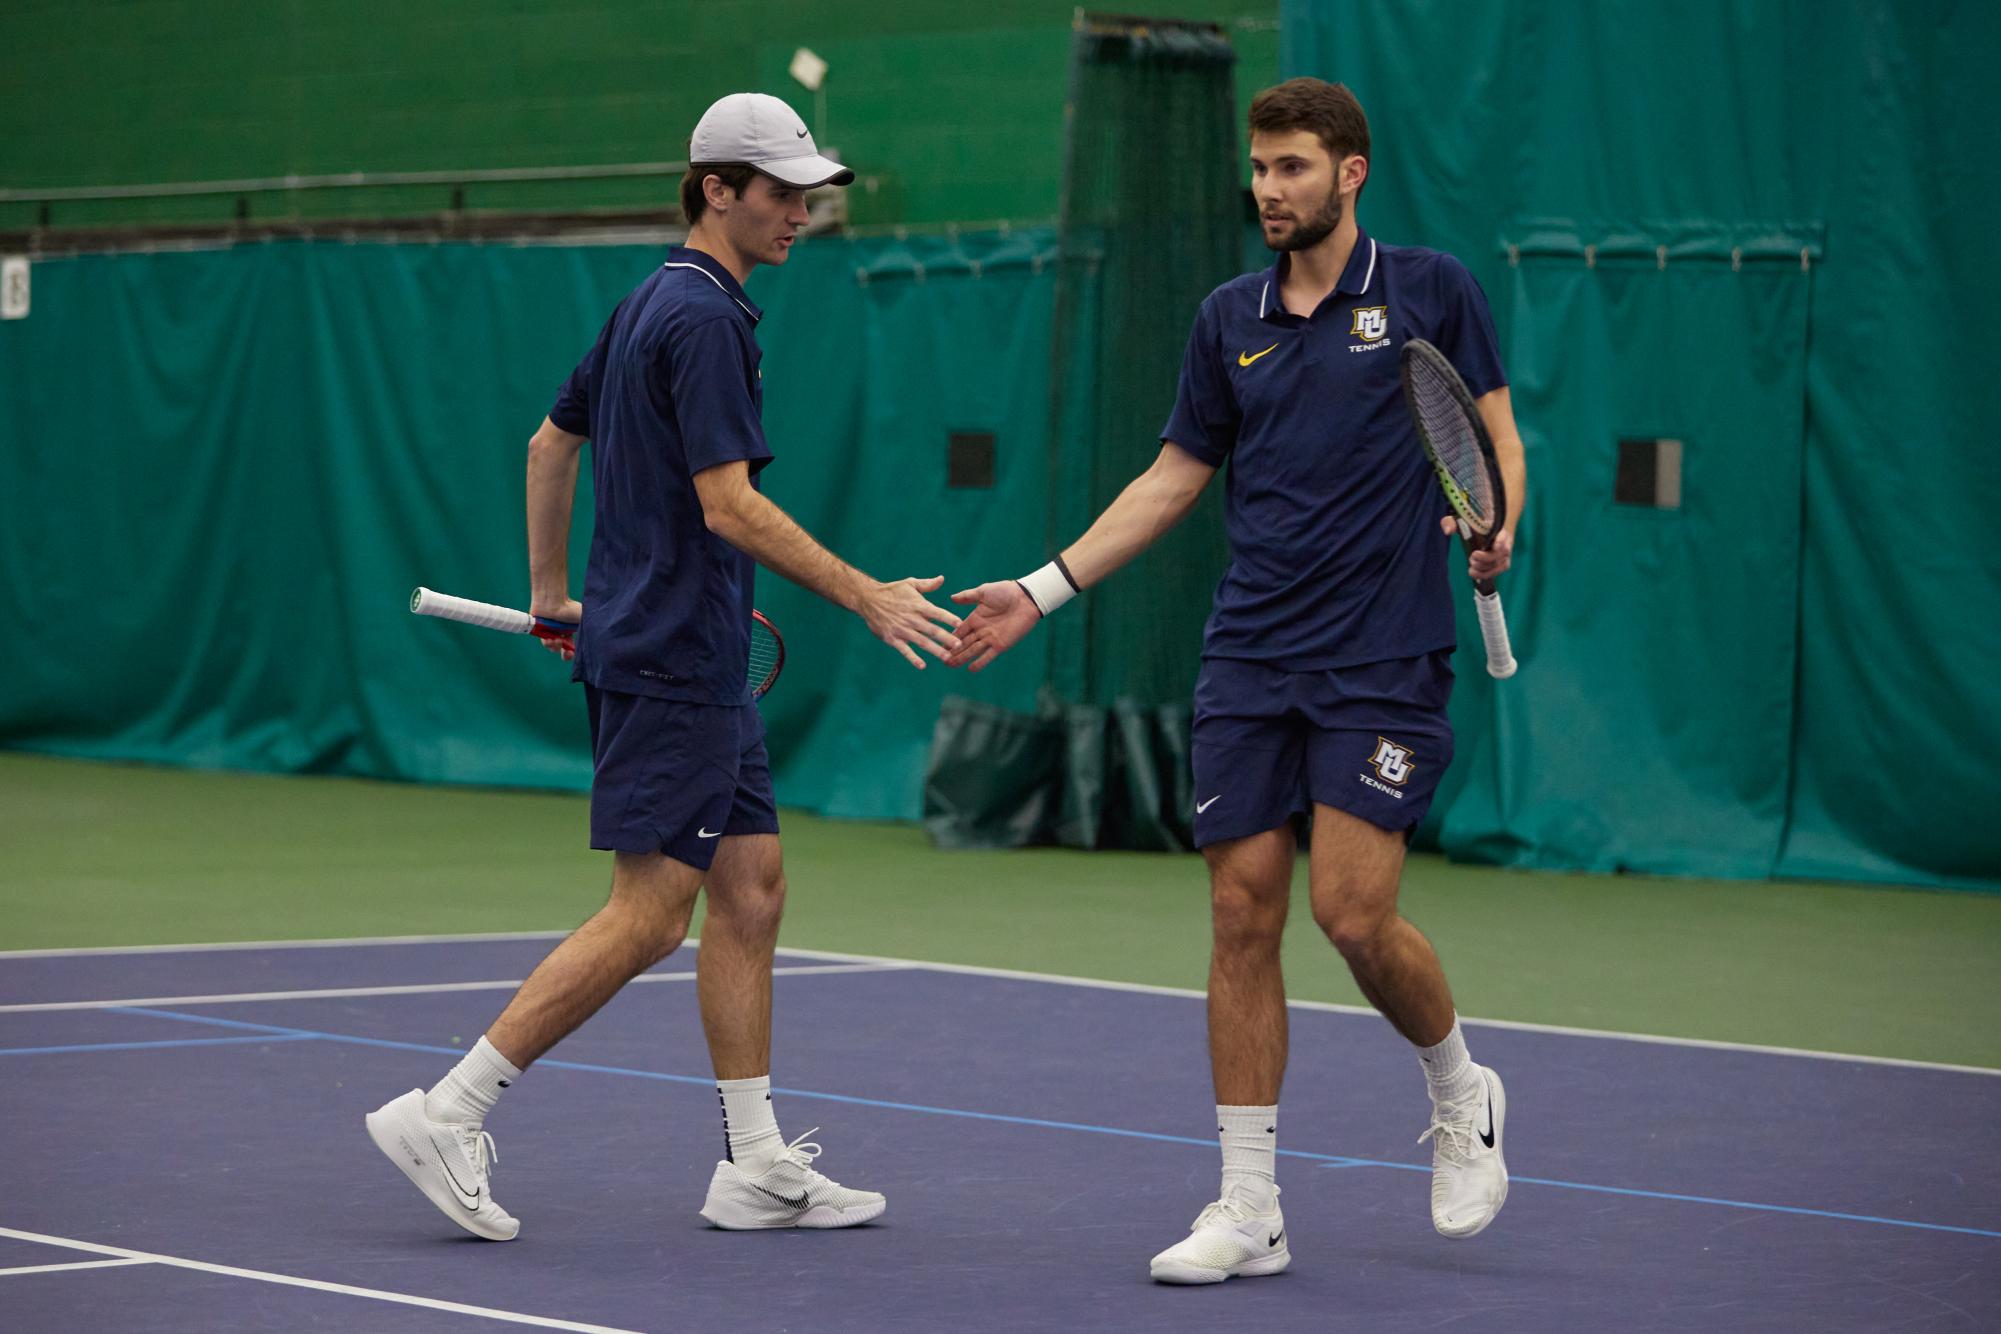 Roegner and Krstulovic’s Successful Doubles Partnership in Marquette Men’s Tennis